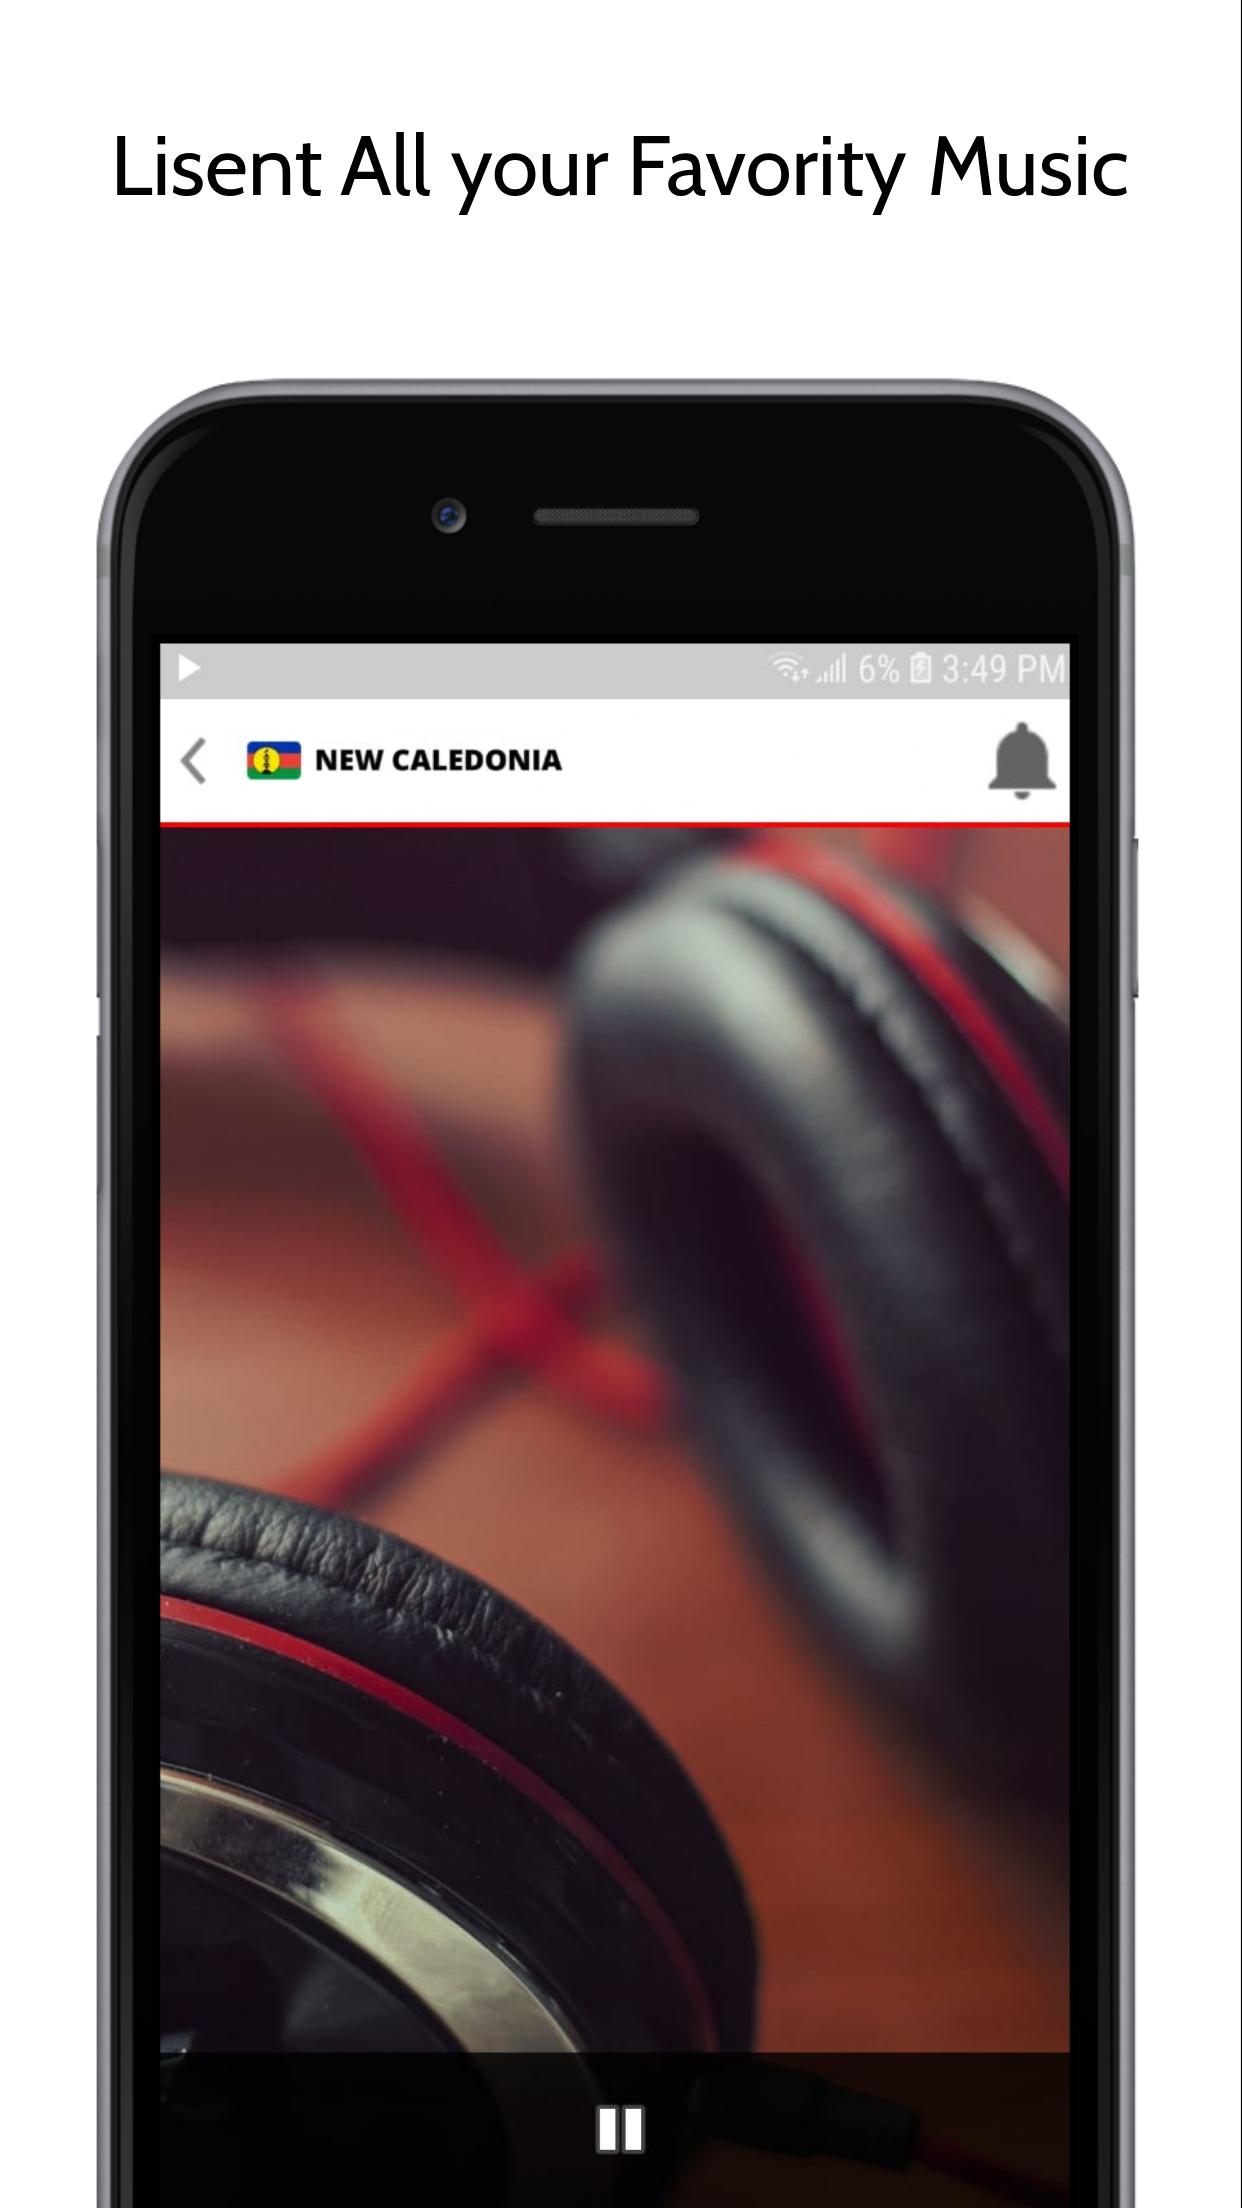 Caledonia Radio for Android - APK Download